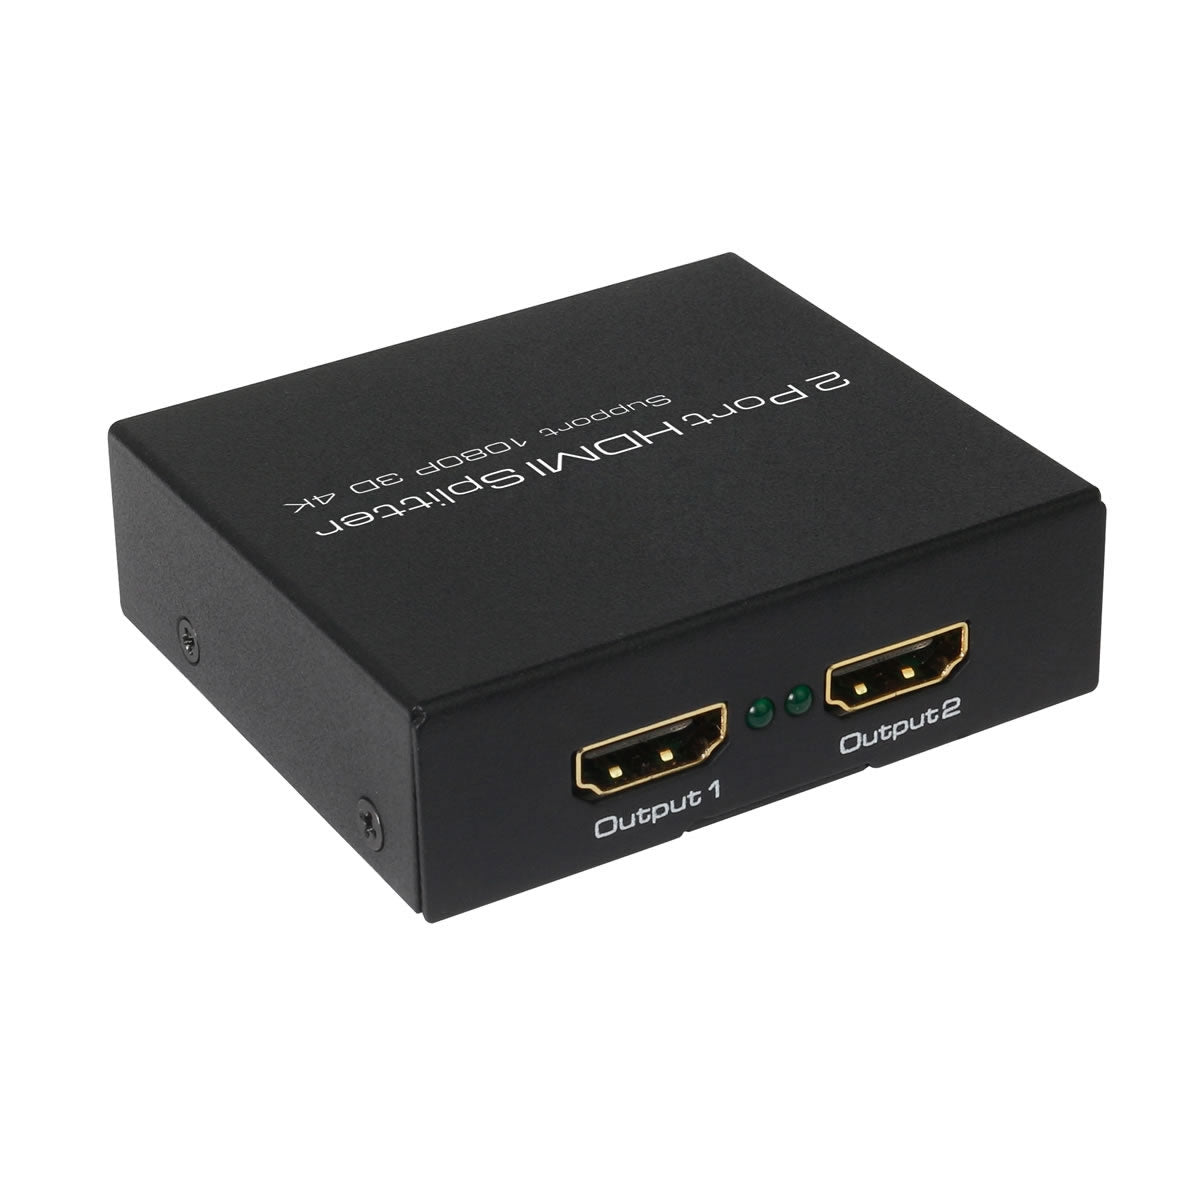  HDMI Splitter with HD HDMI Cable, 1 in 2 Out 4K HDMI Splitter  for Full HD 4K@30HZ 1080P 3D Splitter (1 HDMI Source to 2 HDMI Displays) :  Electronics